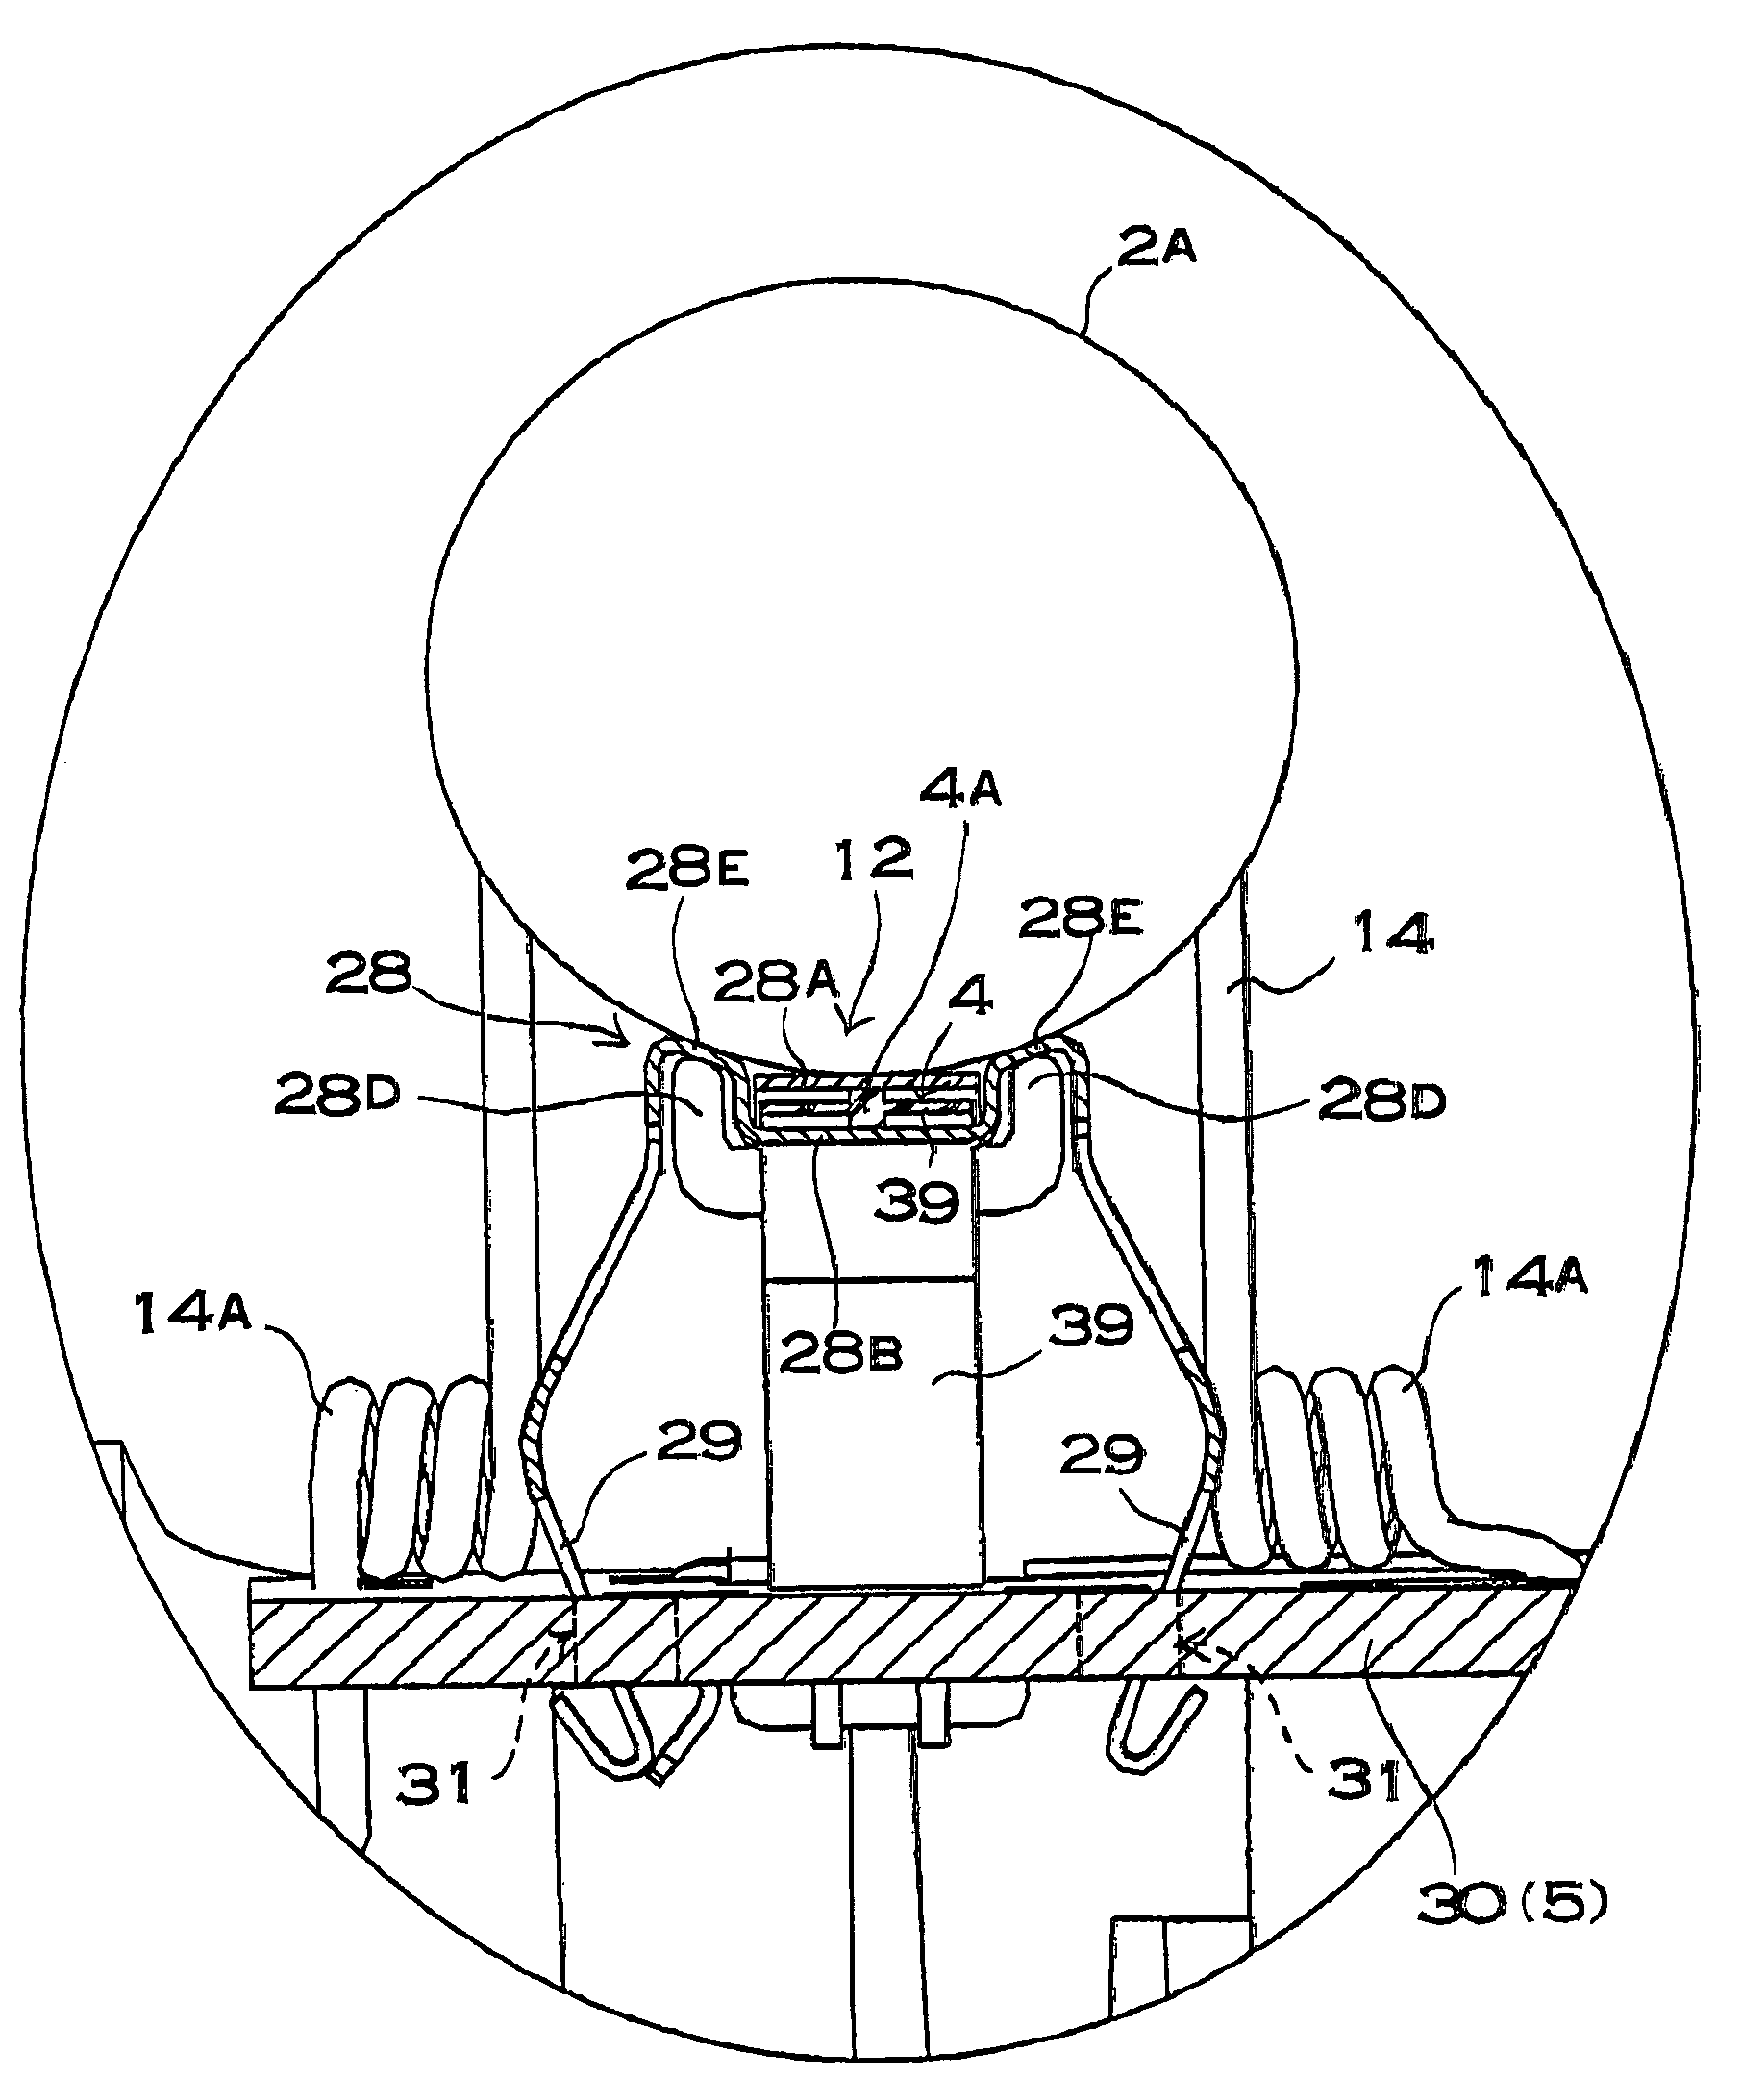 Battery charger having temperature detection portion for detecting battery temperature